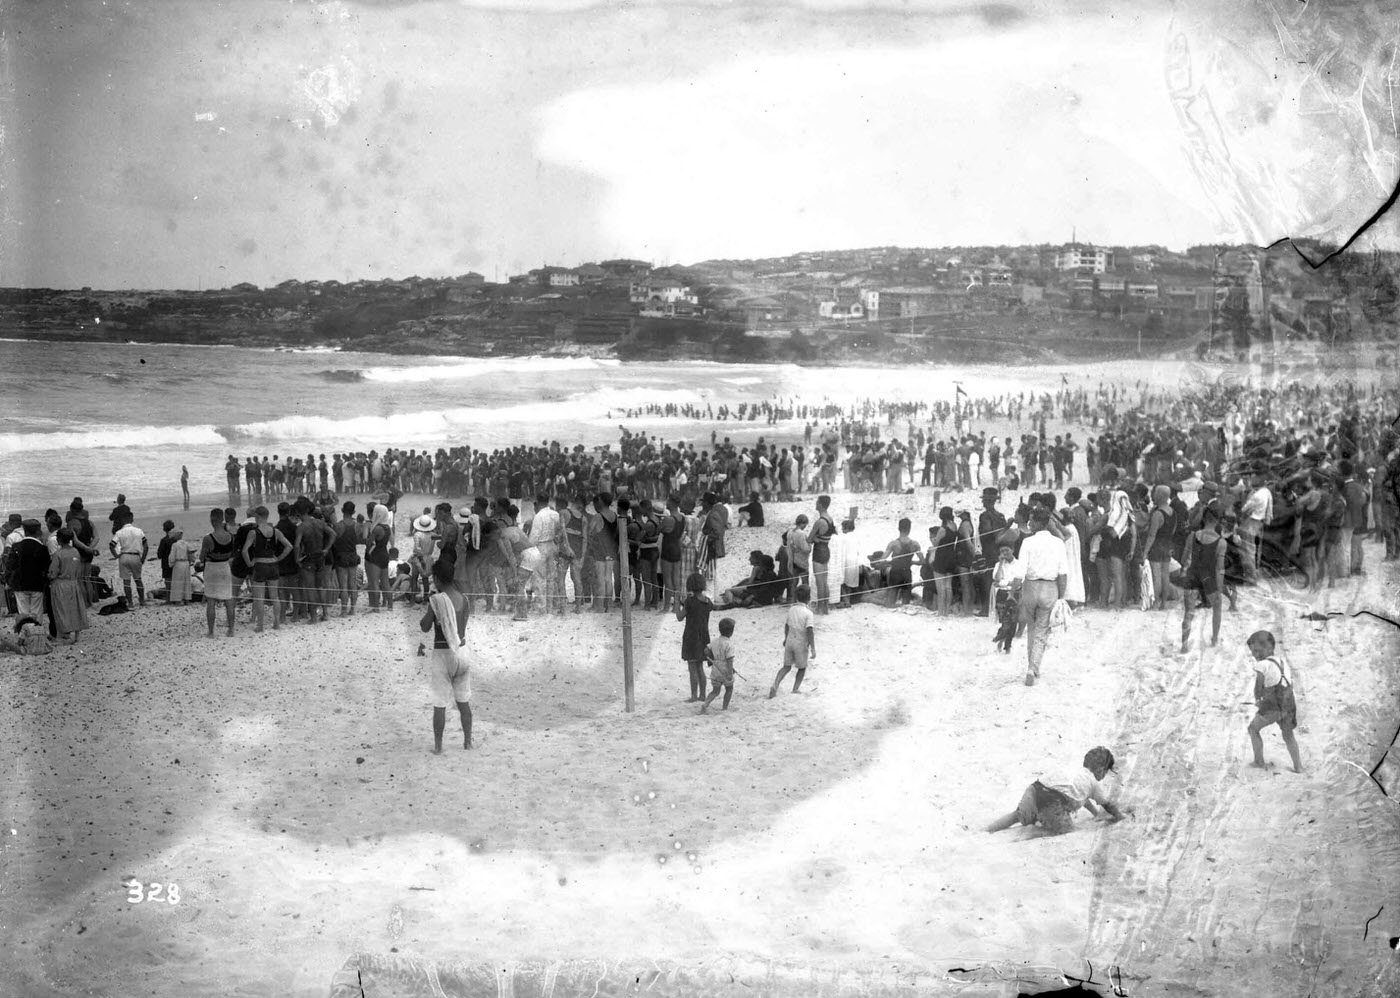 The launch Australia with spectators sailing on the harbour